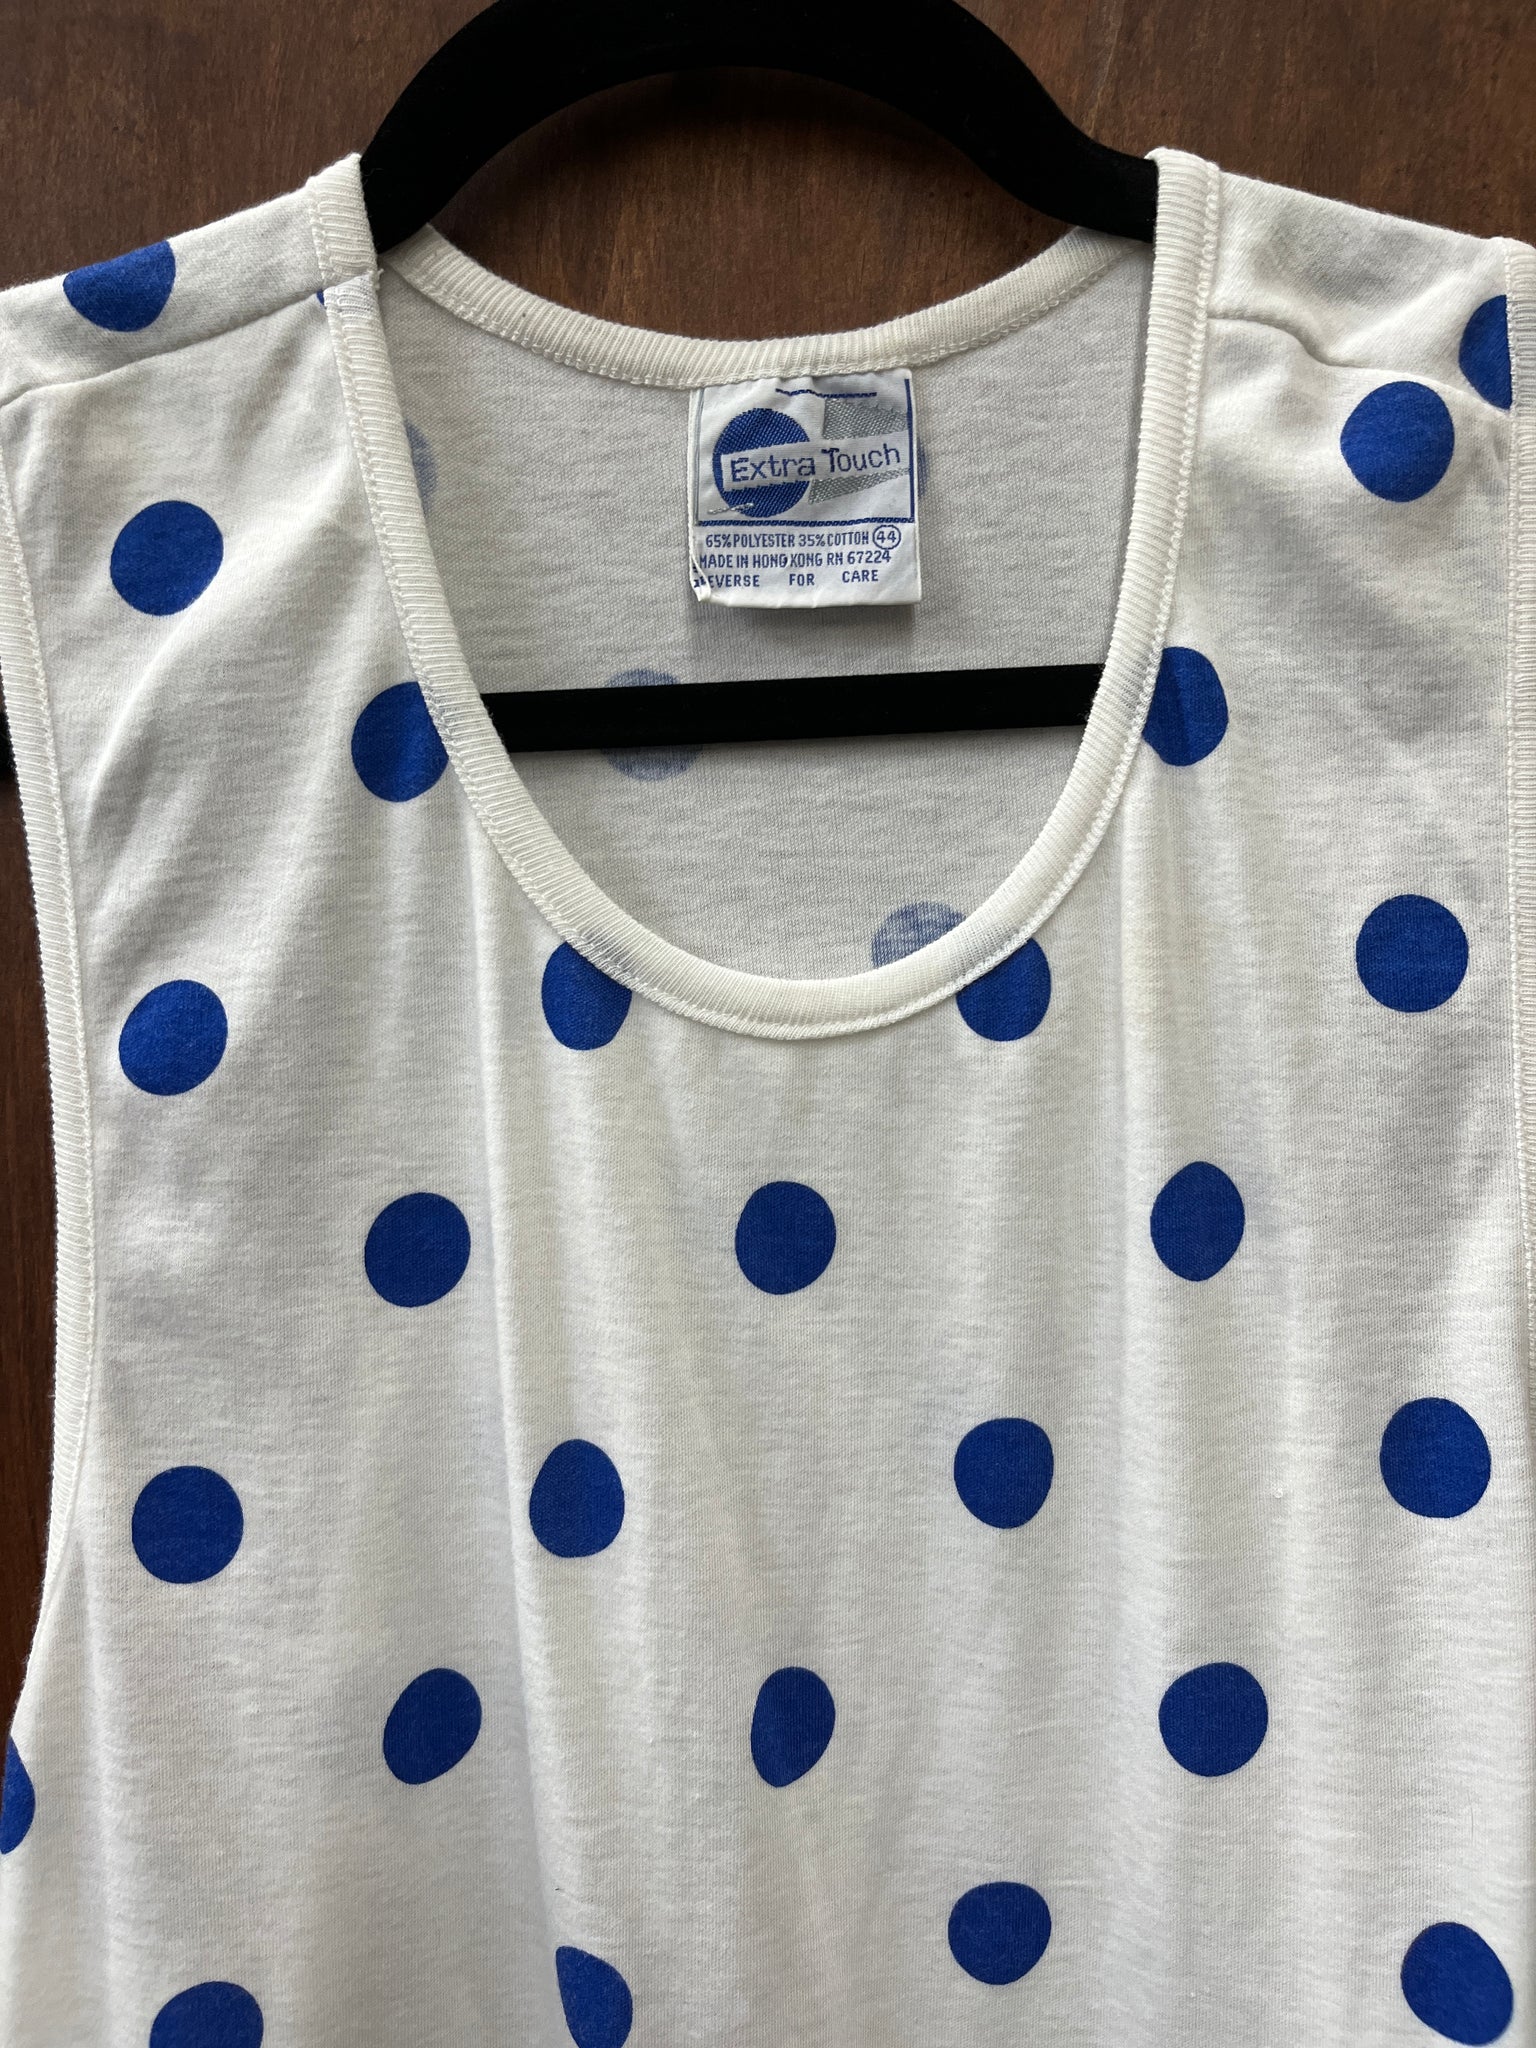 1990s T SHIRT- tanktop- Extra Touch- white with blue polka dots